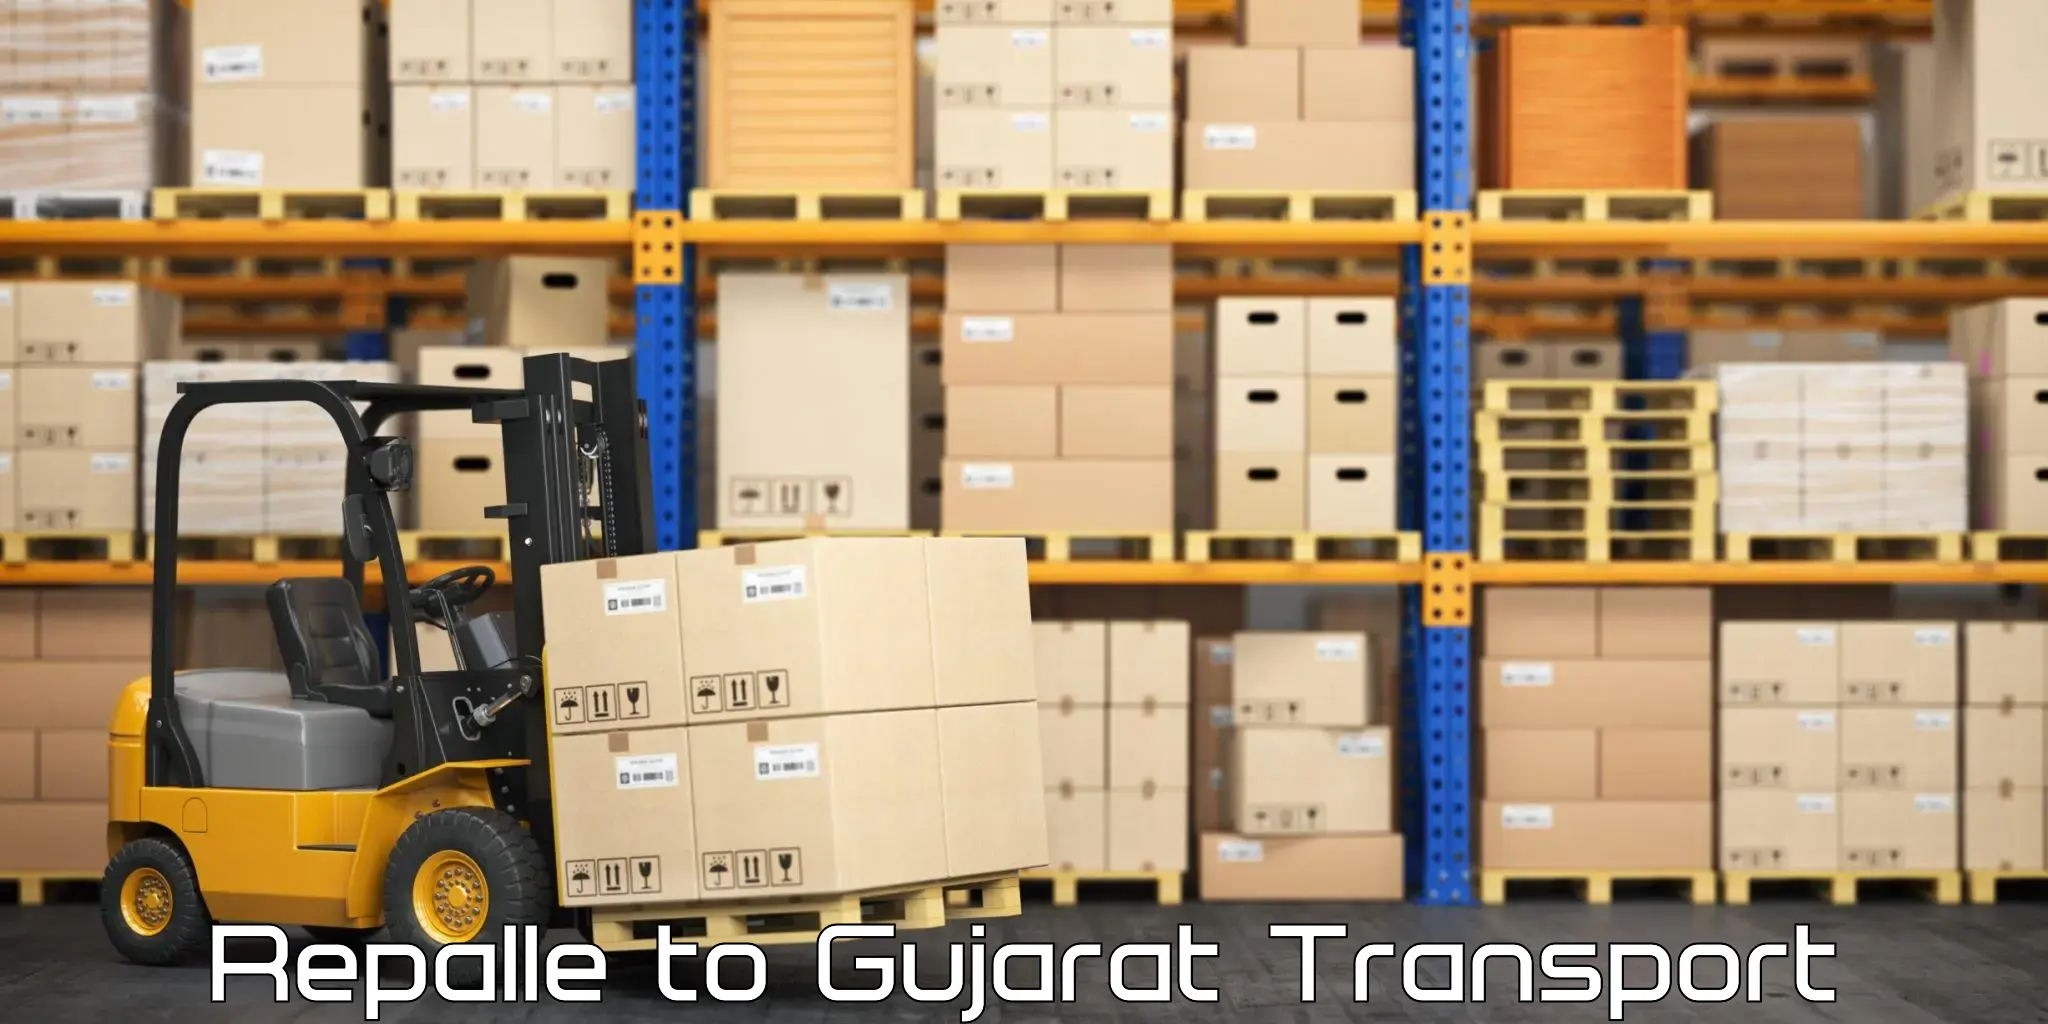 Container transport service Repalle to Gujarat